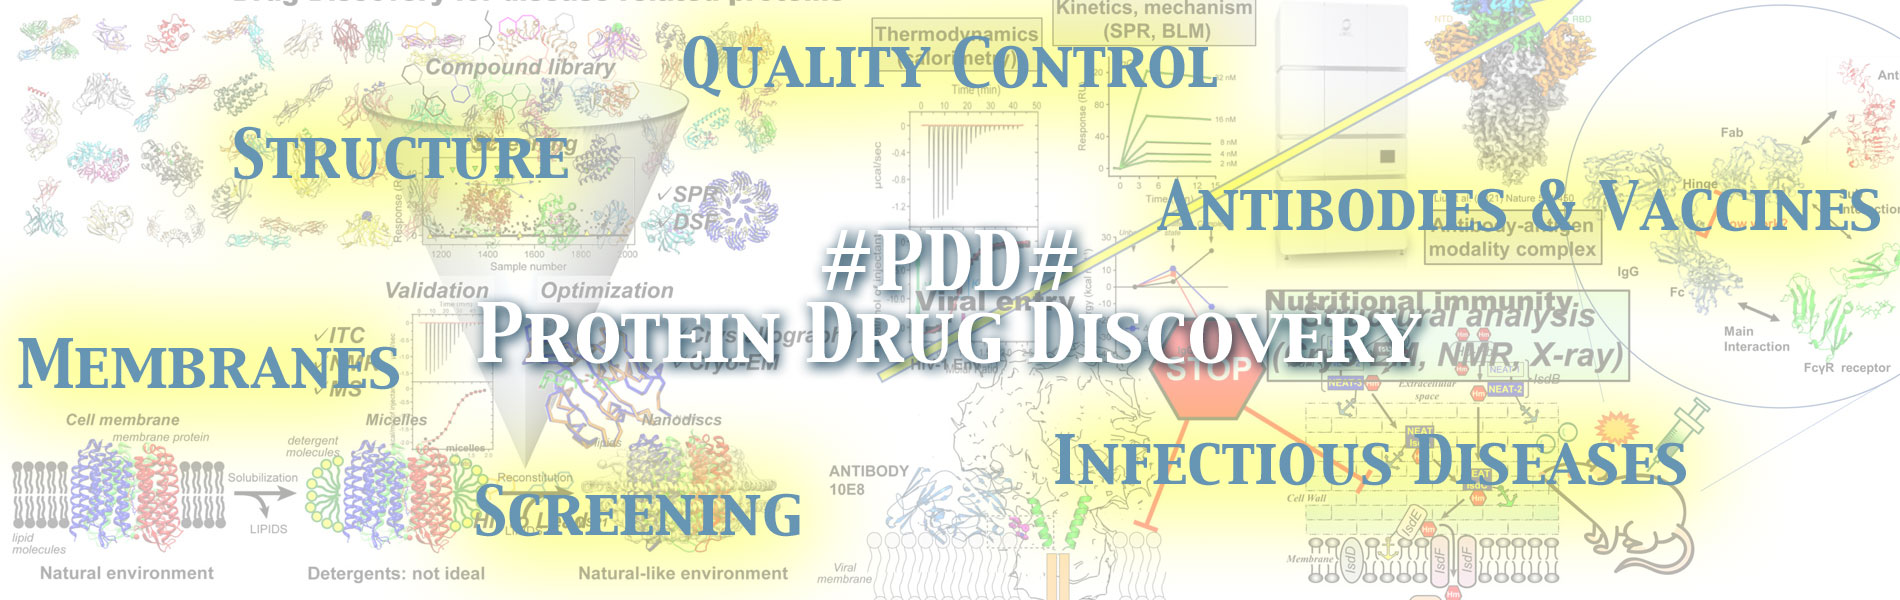 #PDD# Protein Drug Discovery